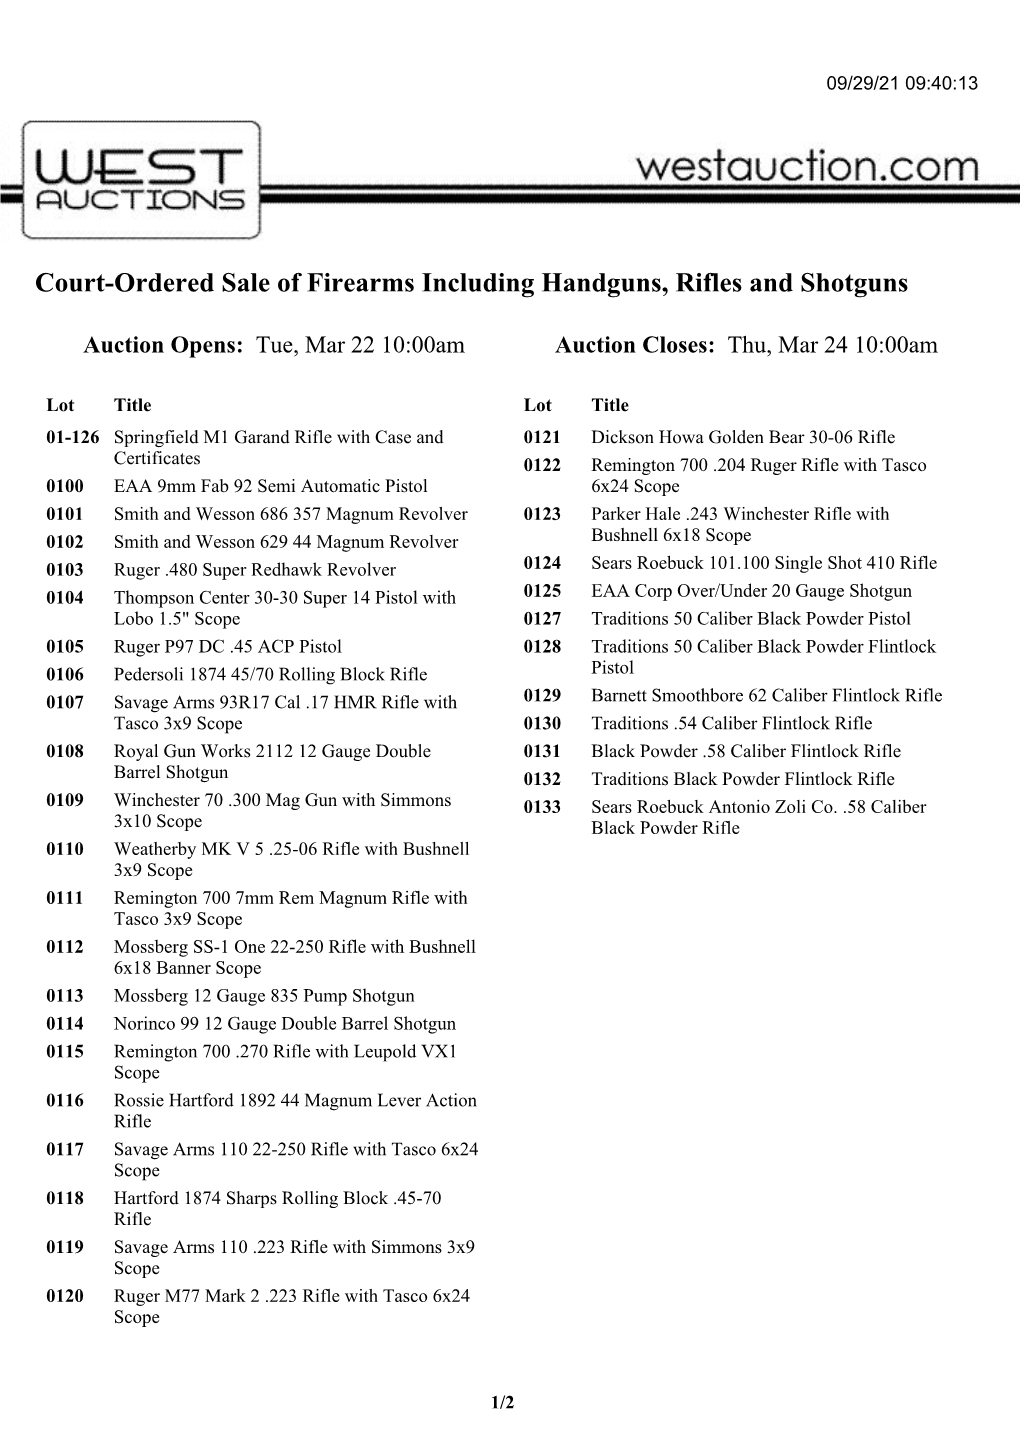 Court-Ordered Sale of Firearms Including Handguns, Rifles and Shotguns